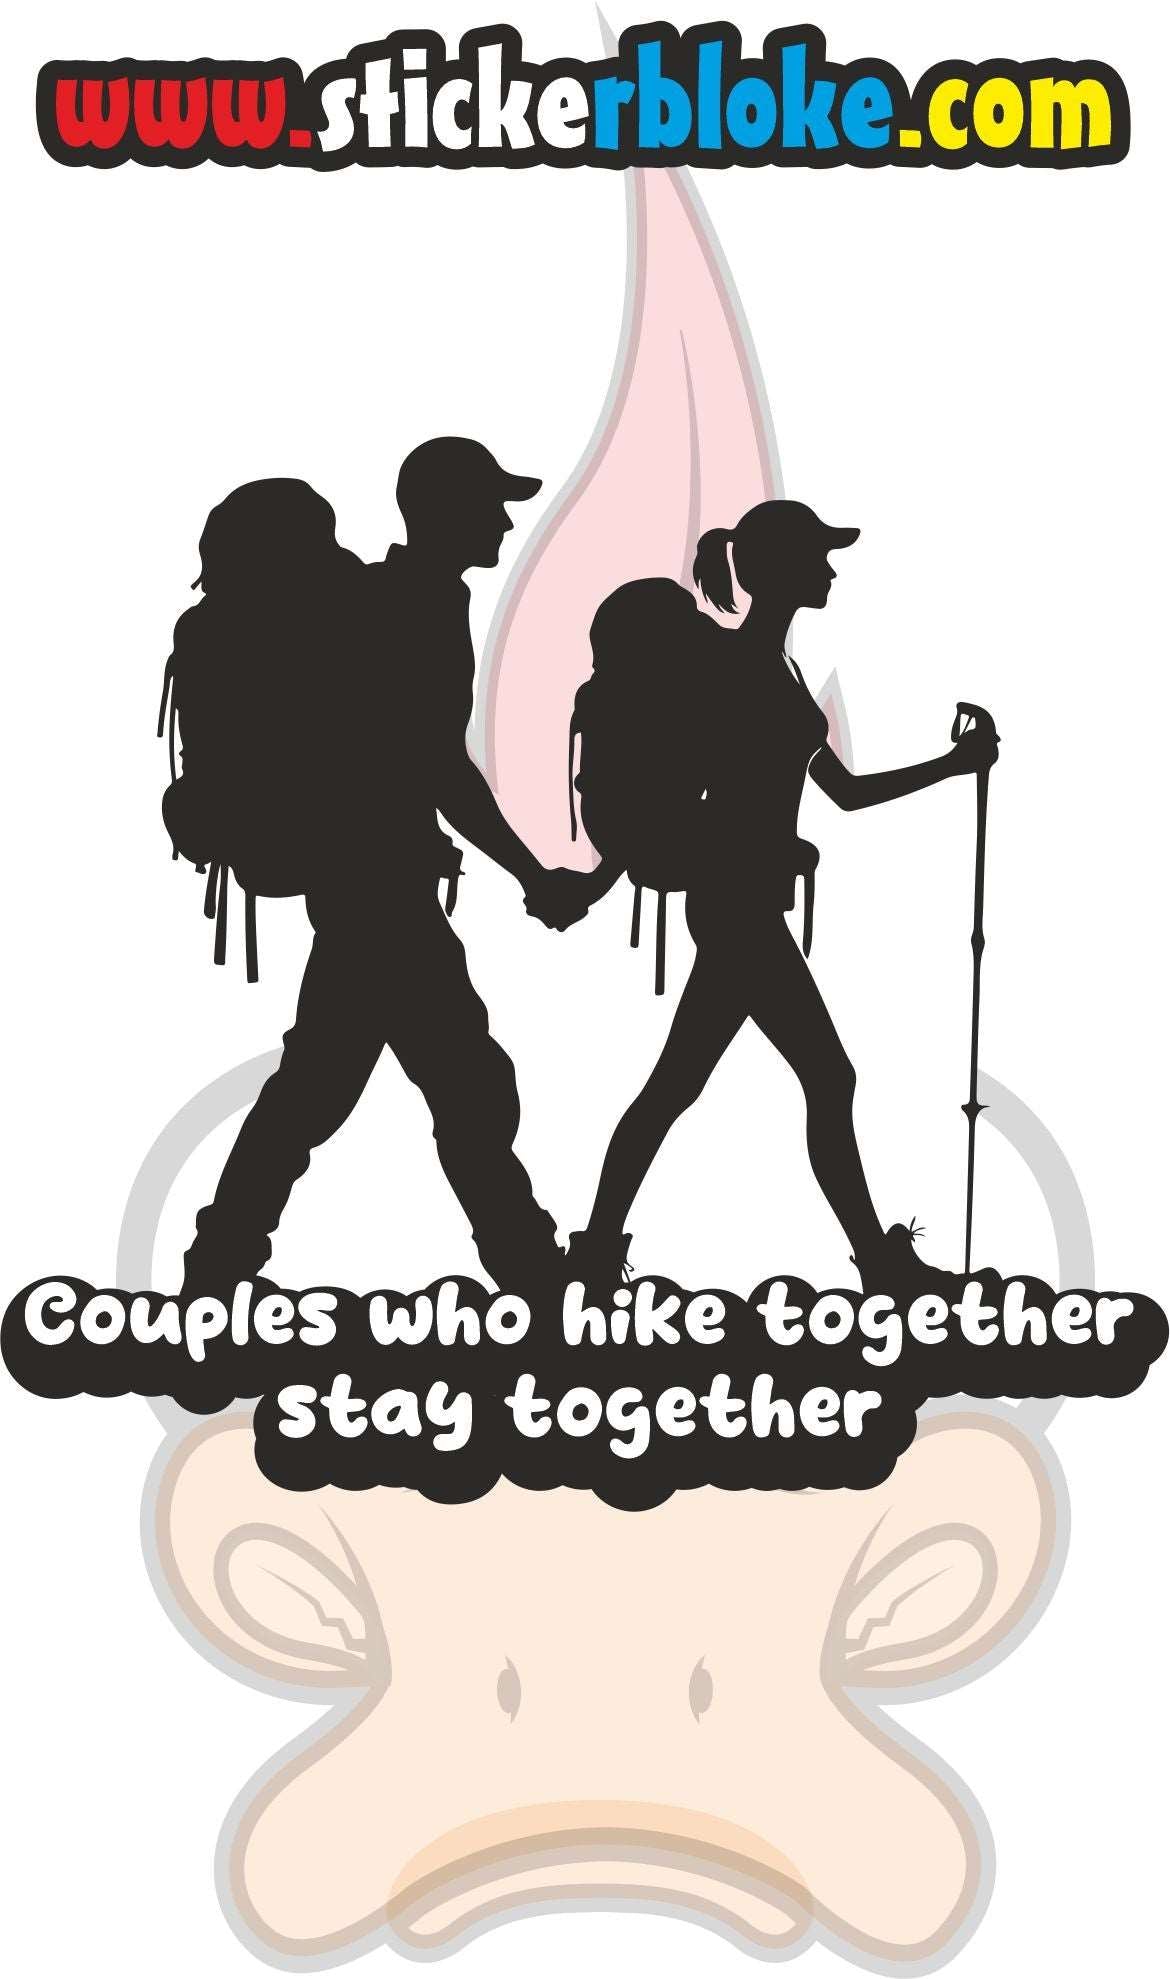 COUPLES WHO HIKE TOGETHER STAY TOGETHER STICKER